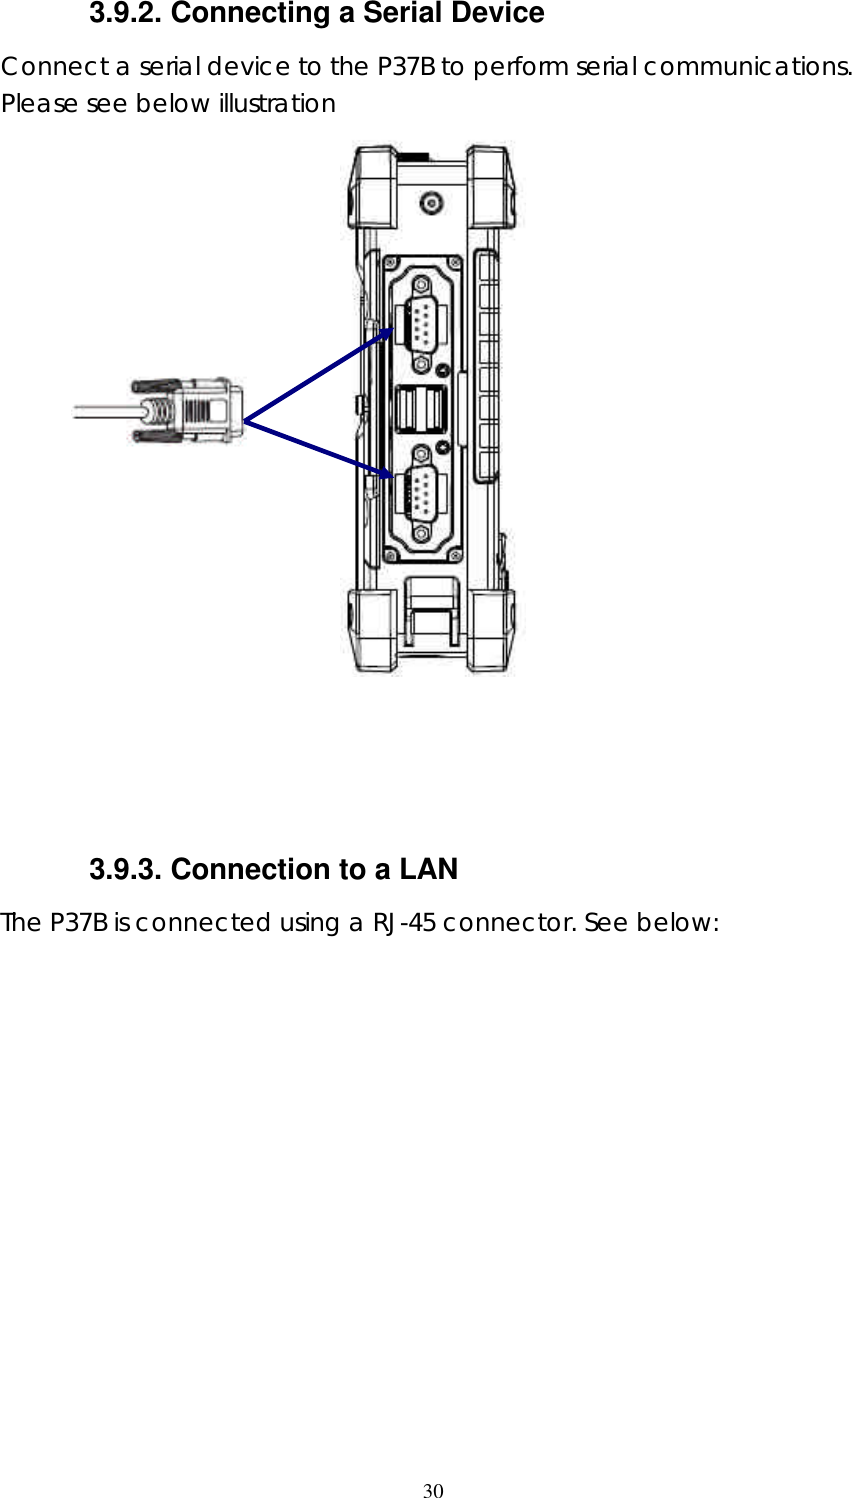  303.9.2. Connecting a Serial Device Connect a serial device to the P37B to perform serial communications. Please see below illustration      3.9.3. Connection to a LAN The P37B is connected using a RJ-45 connector. See below:   